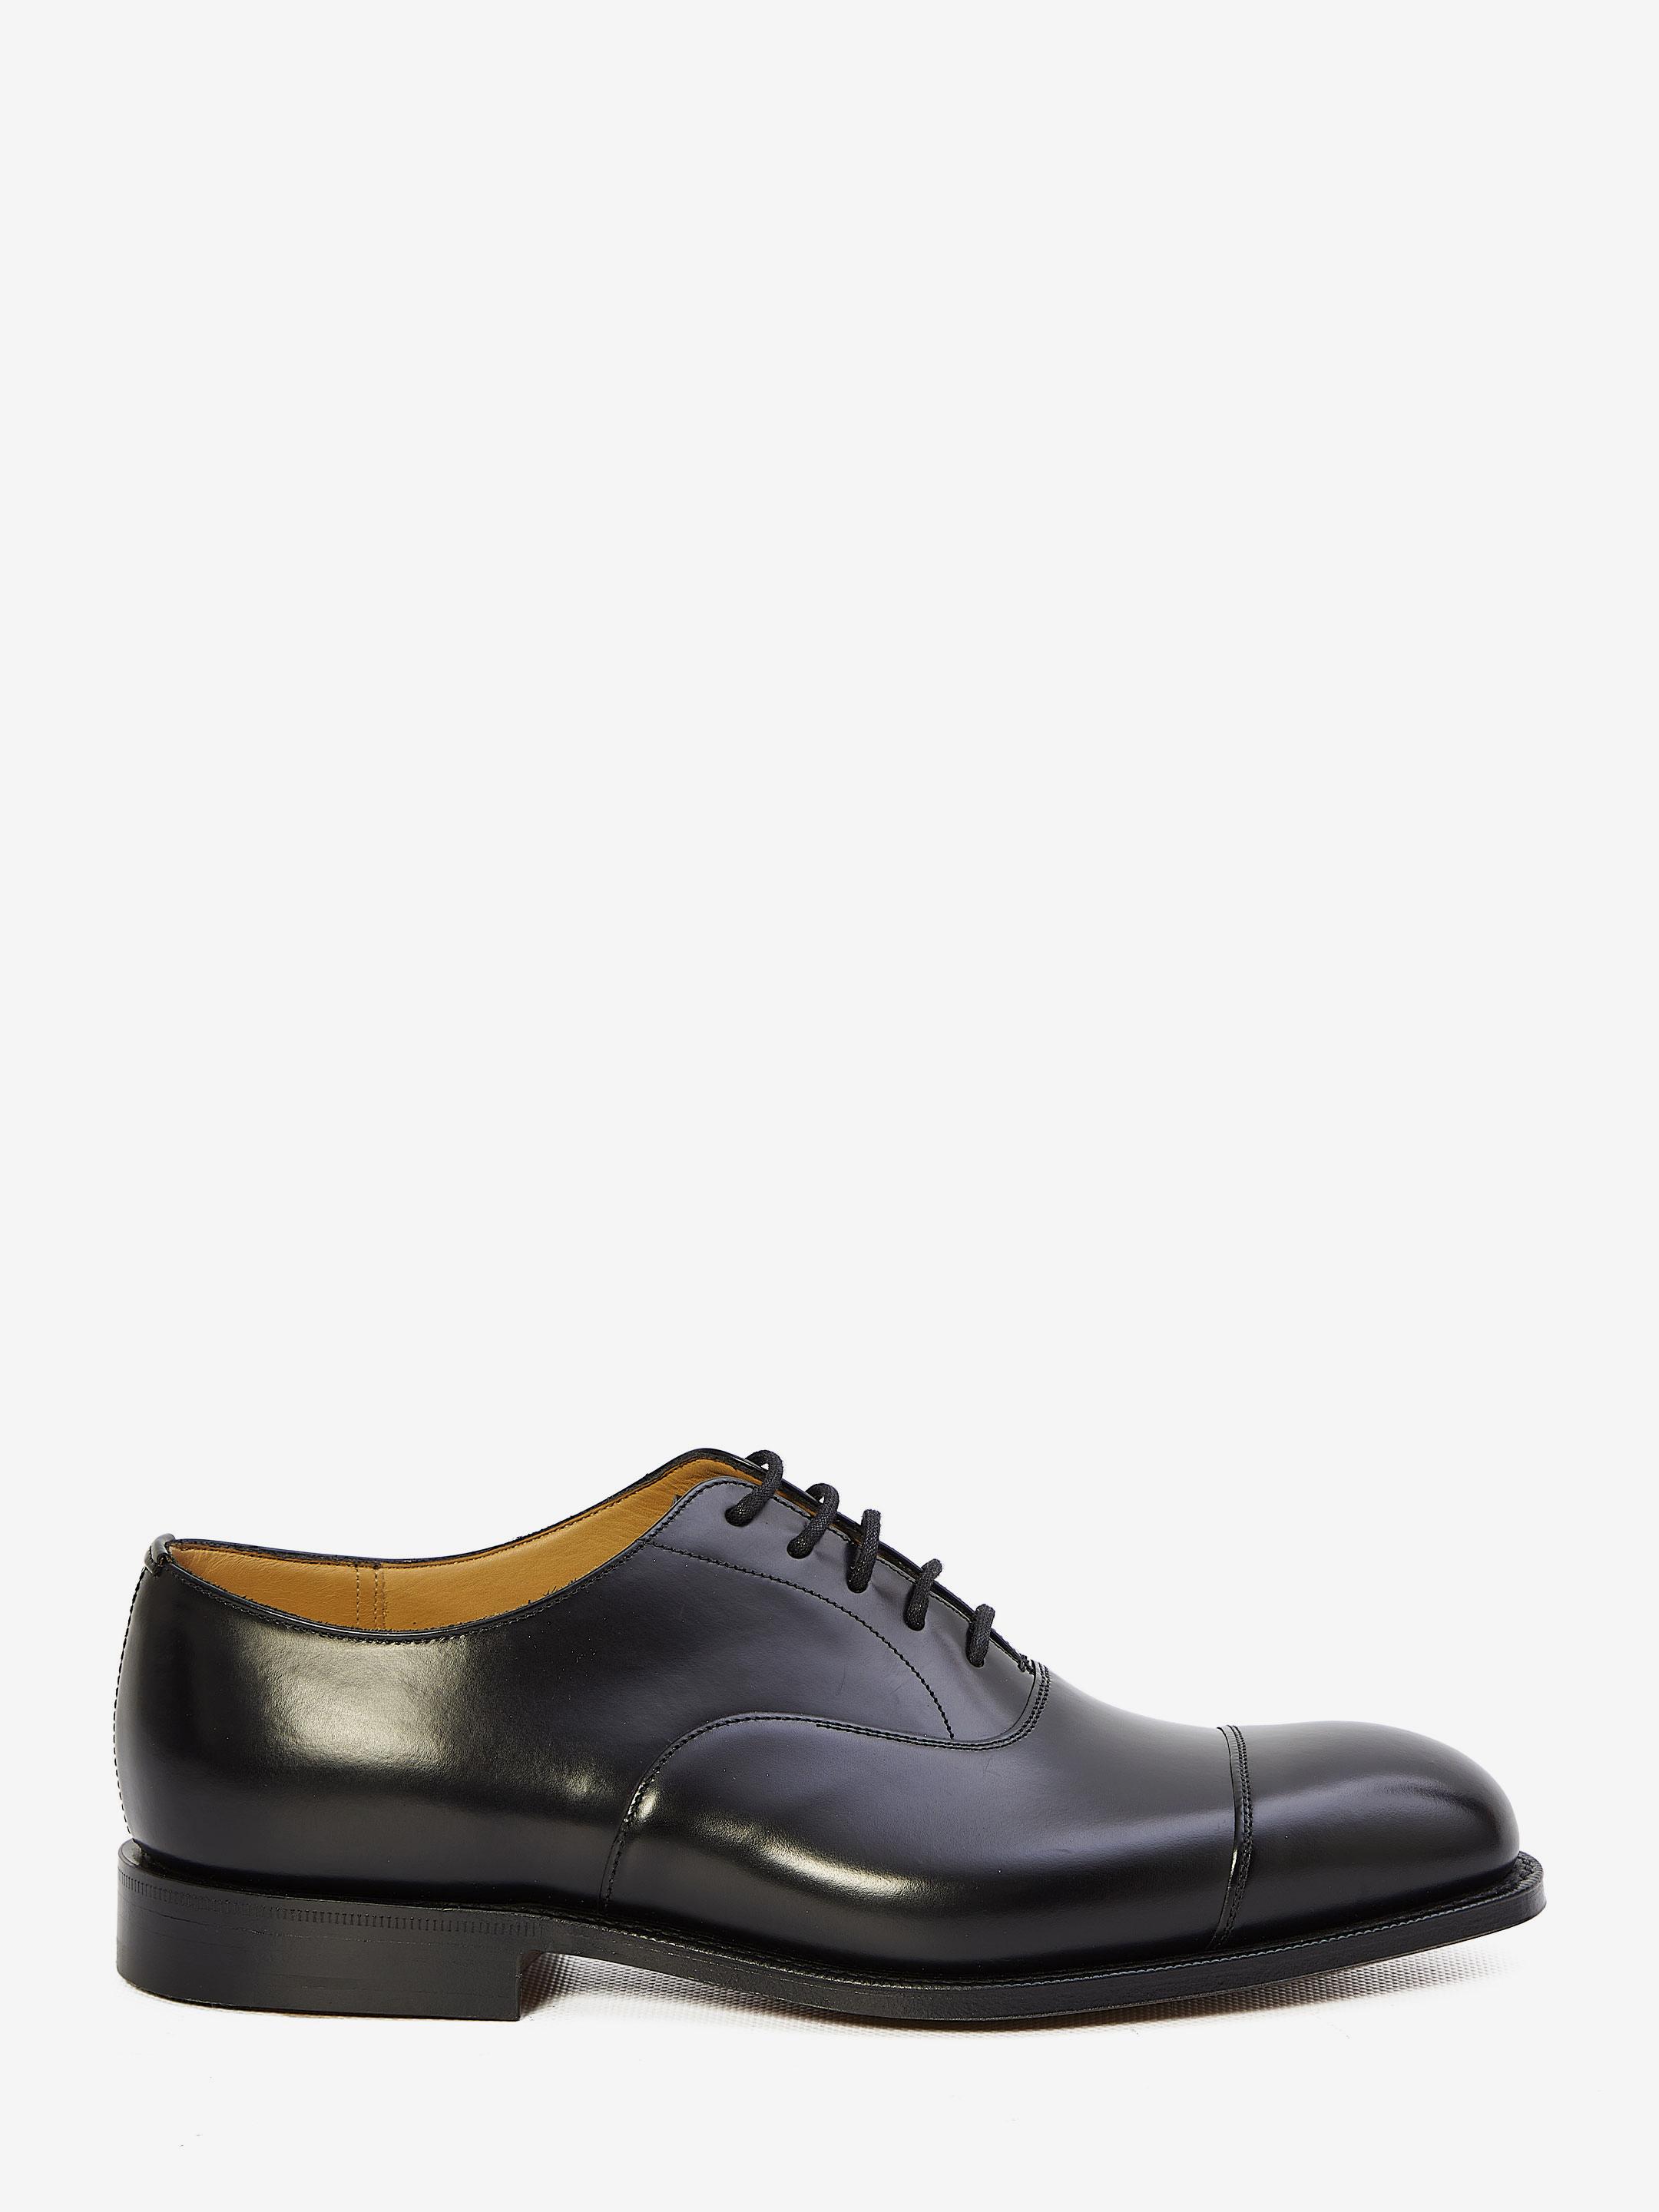 CHURCH'S - Consul 173 Oxford shoes | Leam Roma - Luxury Shopping Online